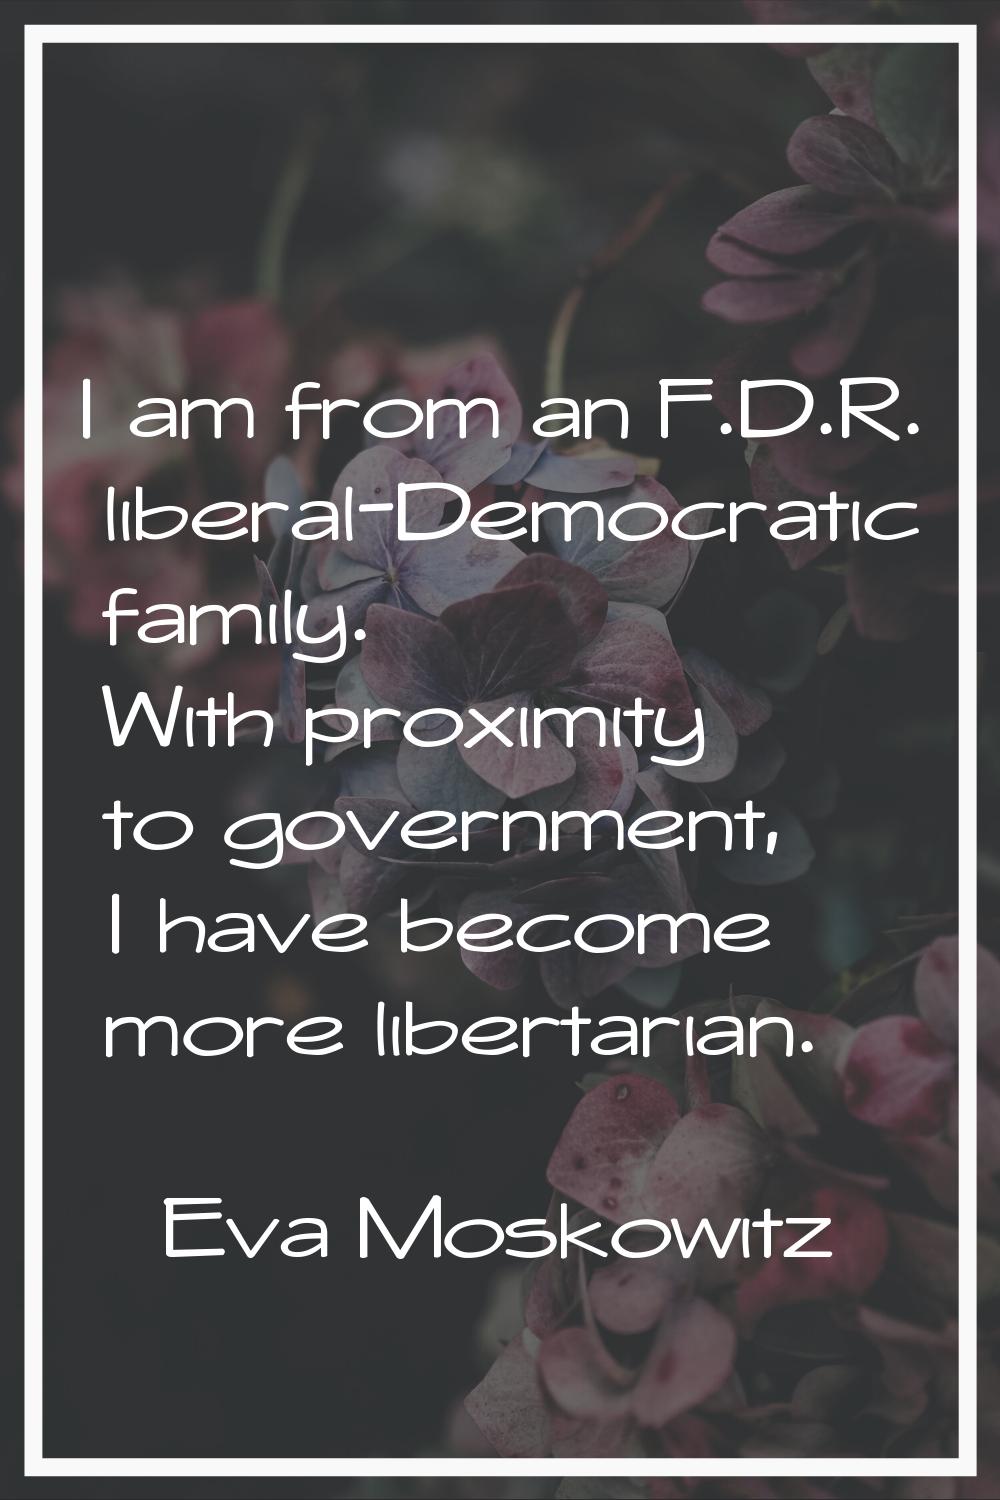 I am from an F.D.R. liberal-Democratic family. With proximity to government, I have become more lib